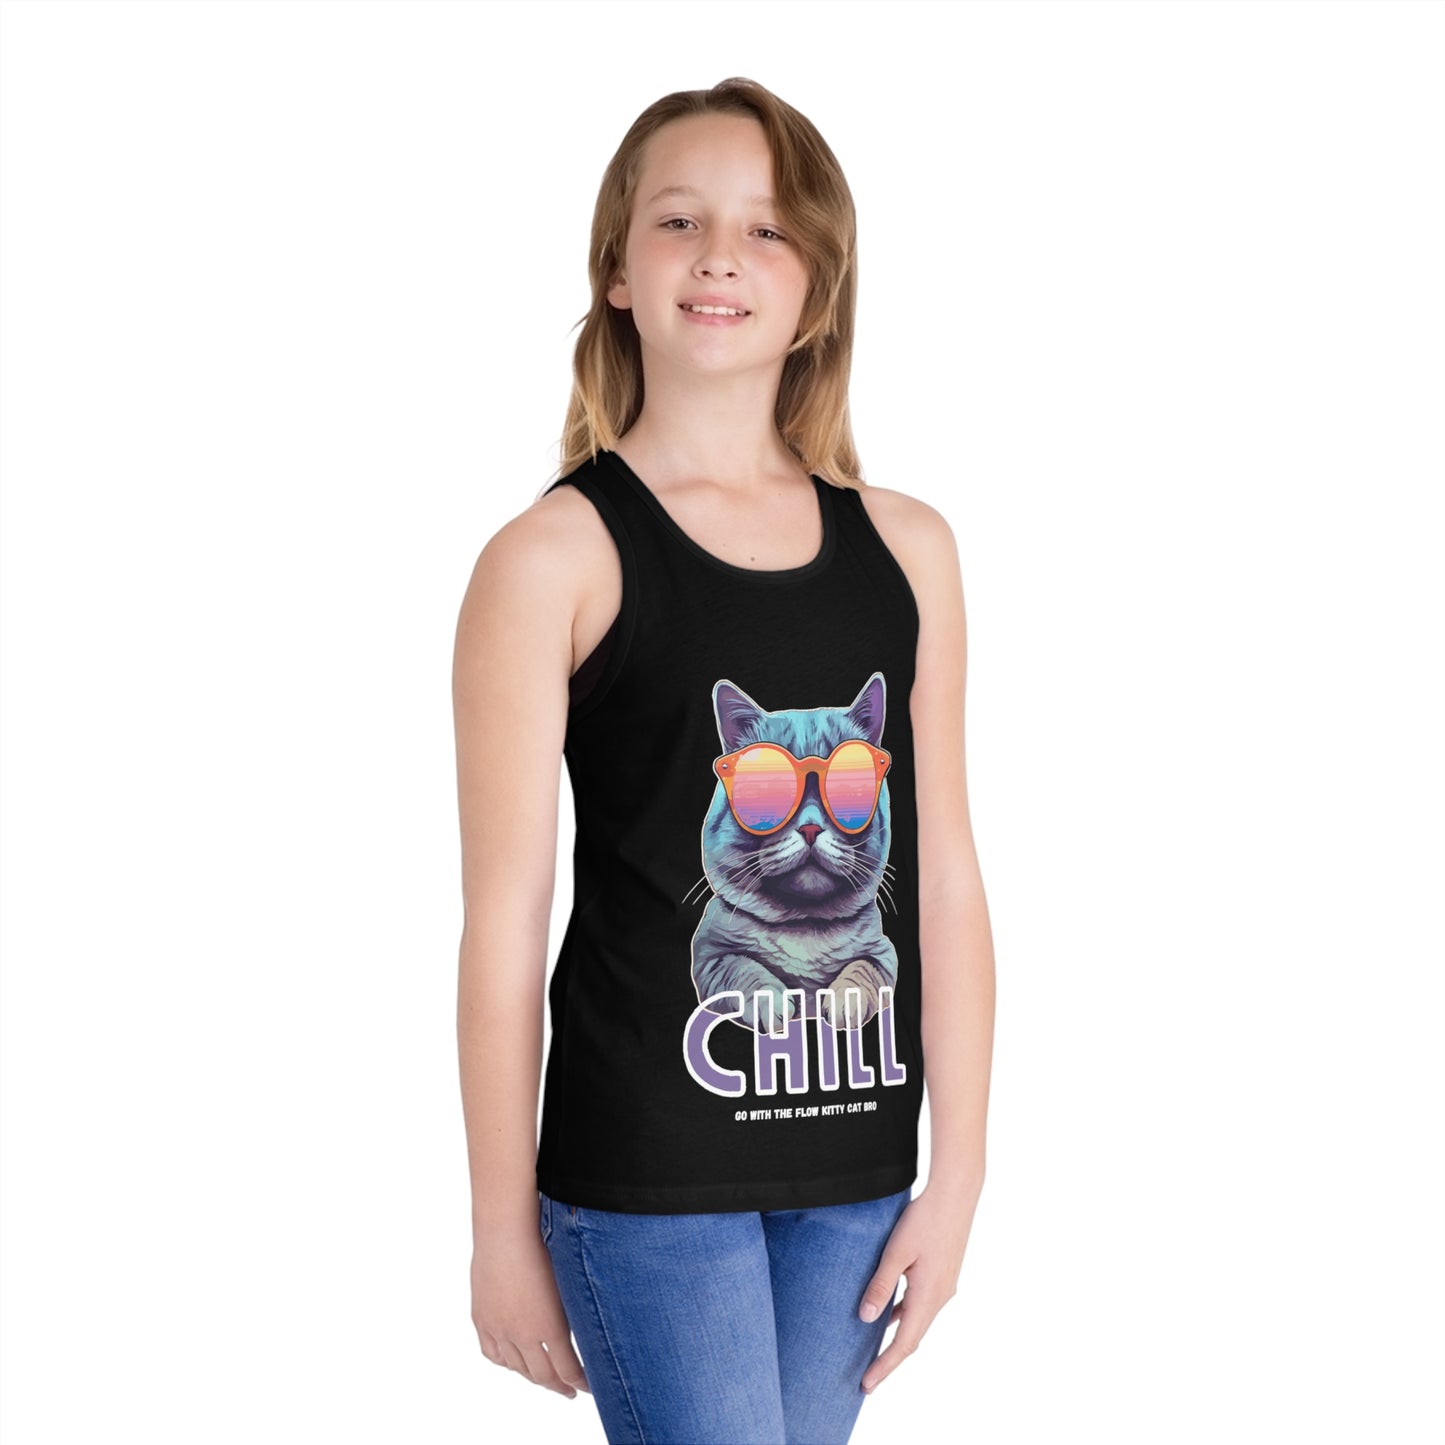 KIDS 'Chill: Go With The Flow Kitty Cat Bro' Kid's Jersey Tank Top